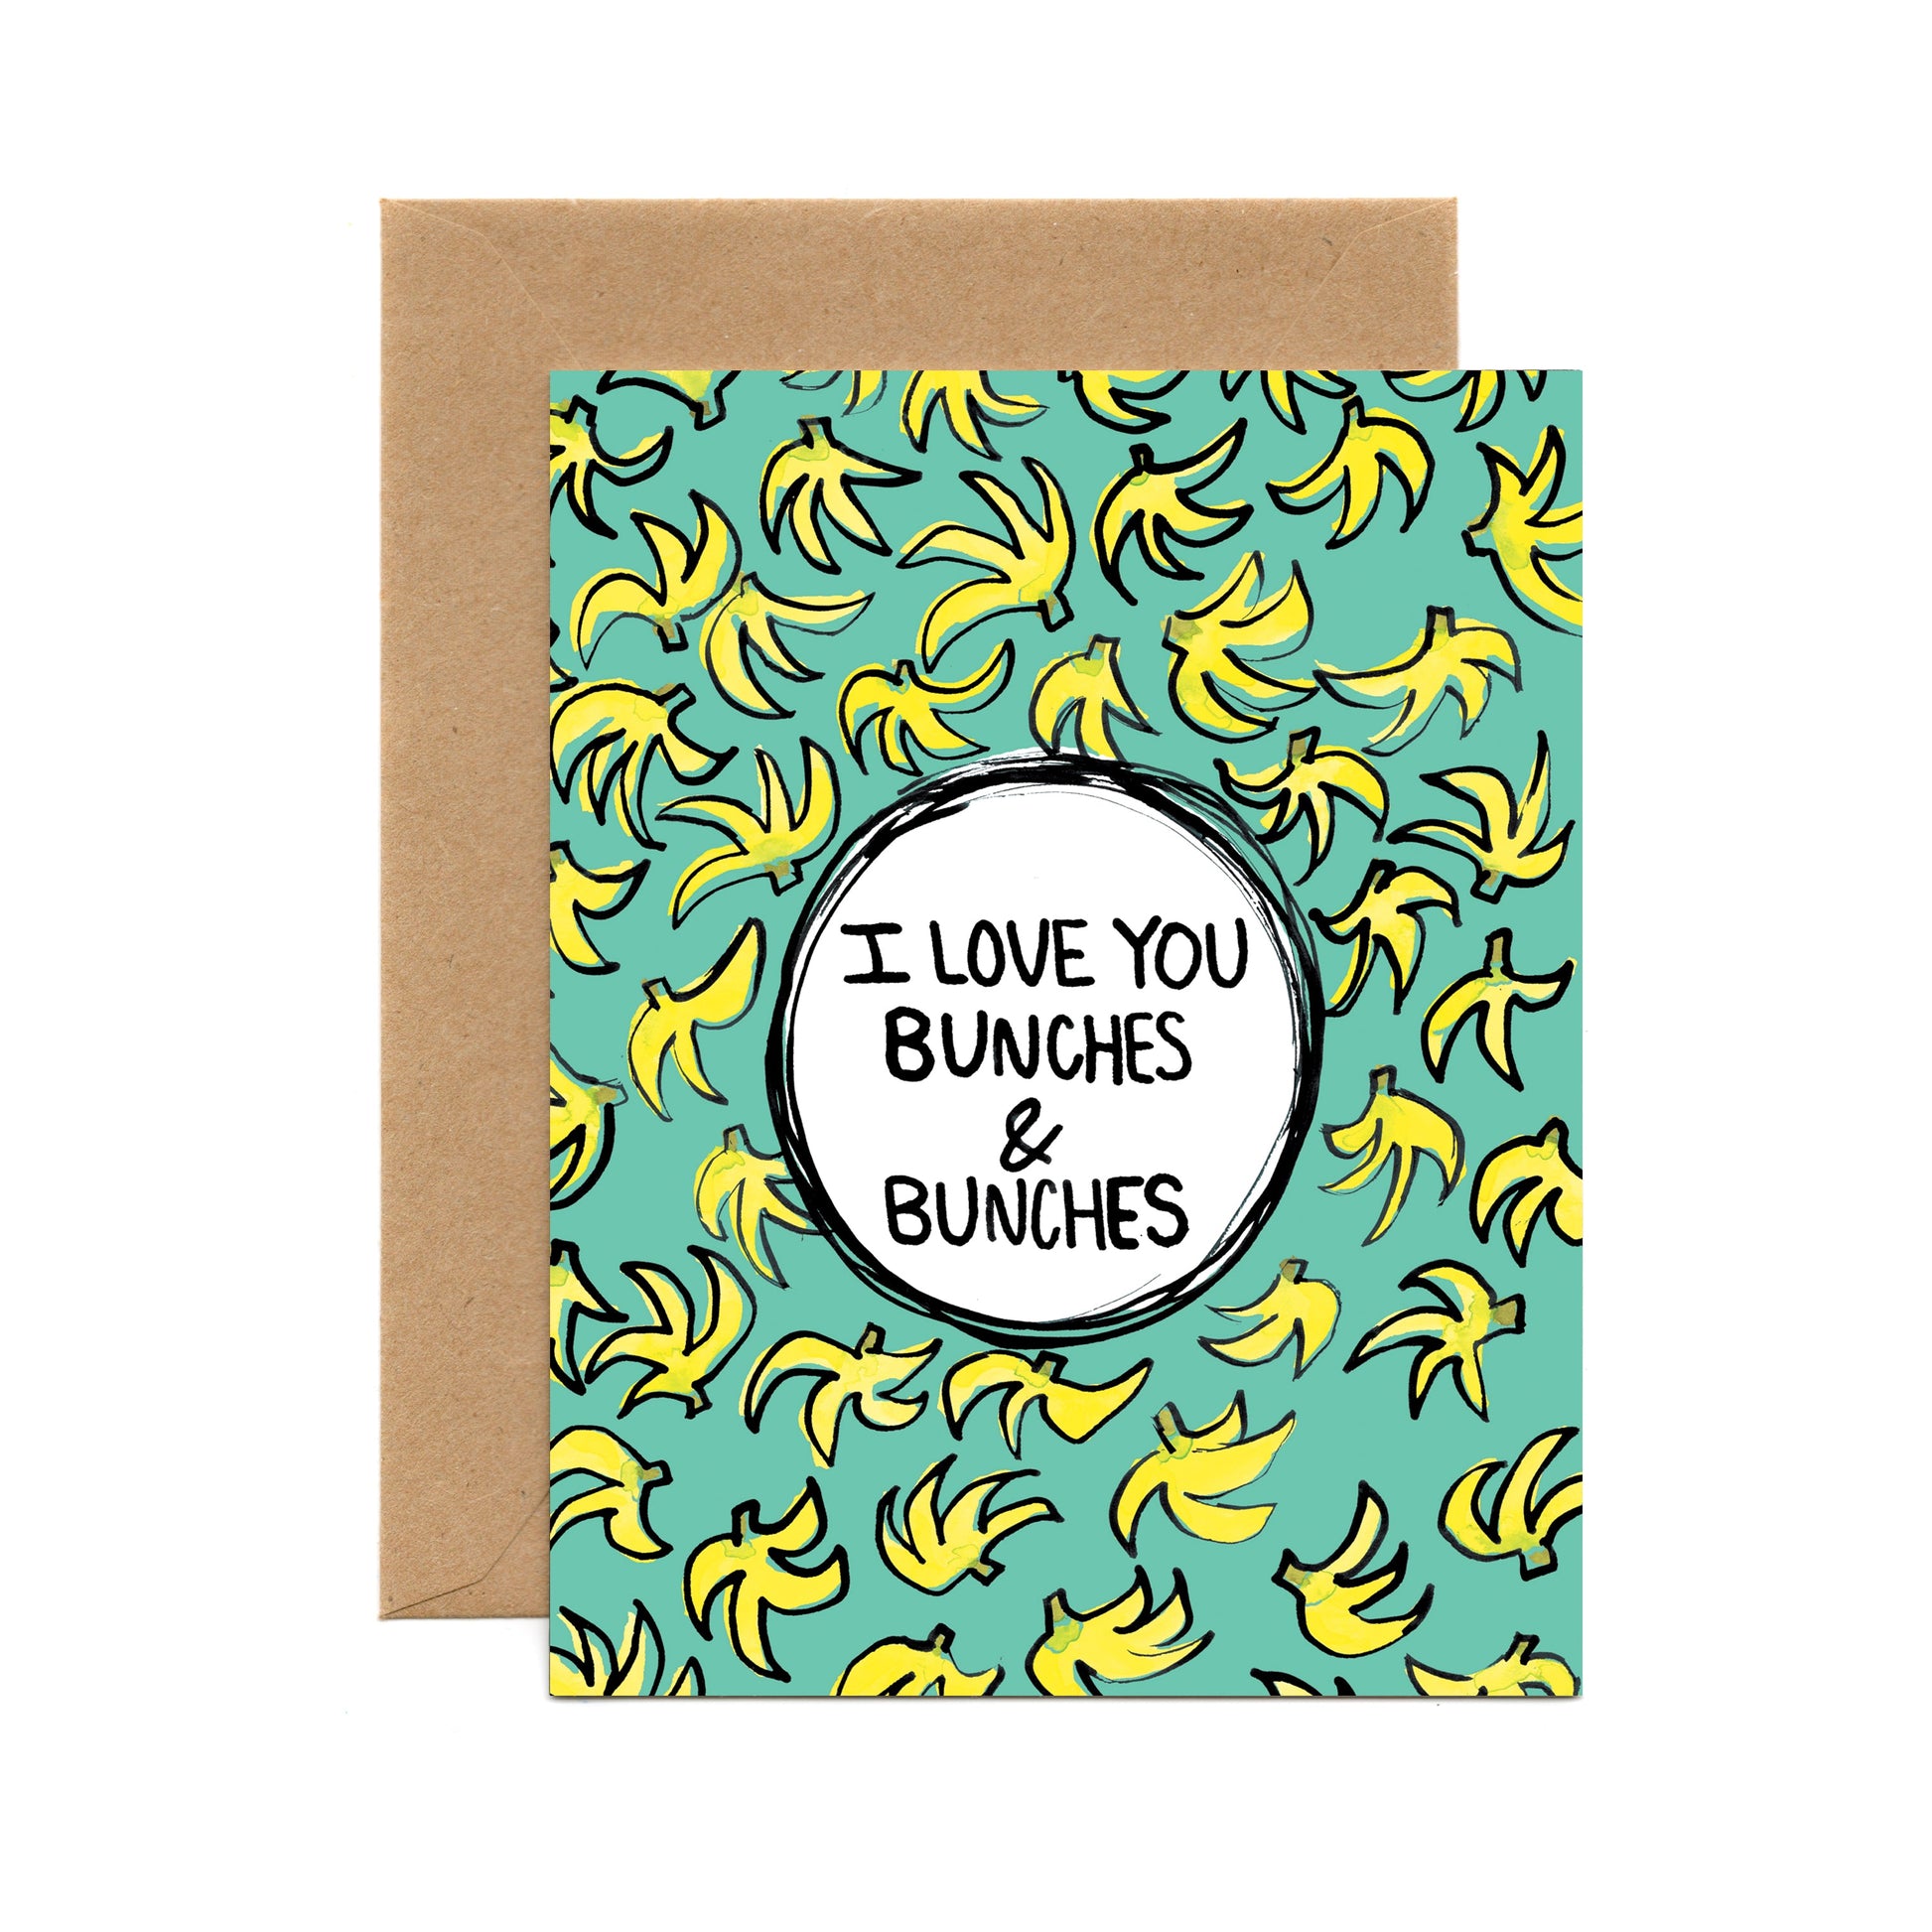 I Love You Bunches (Single Card) A2 Card Tiny and Snail